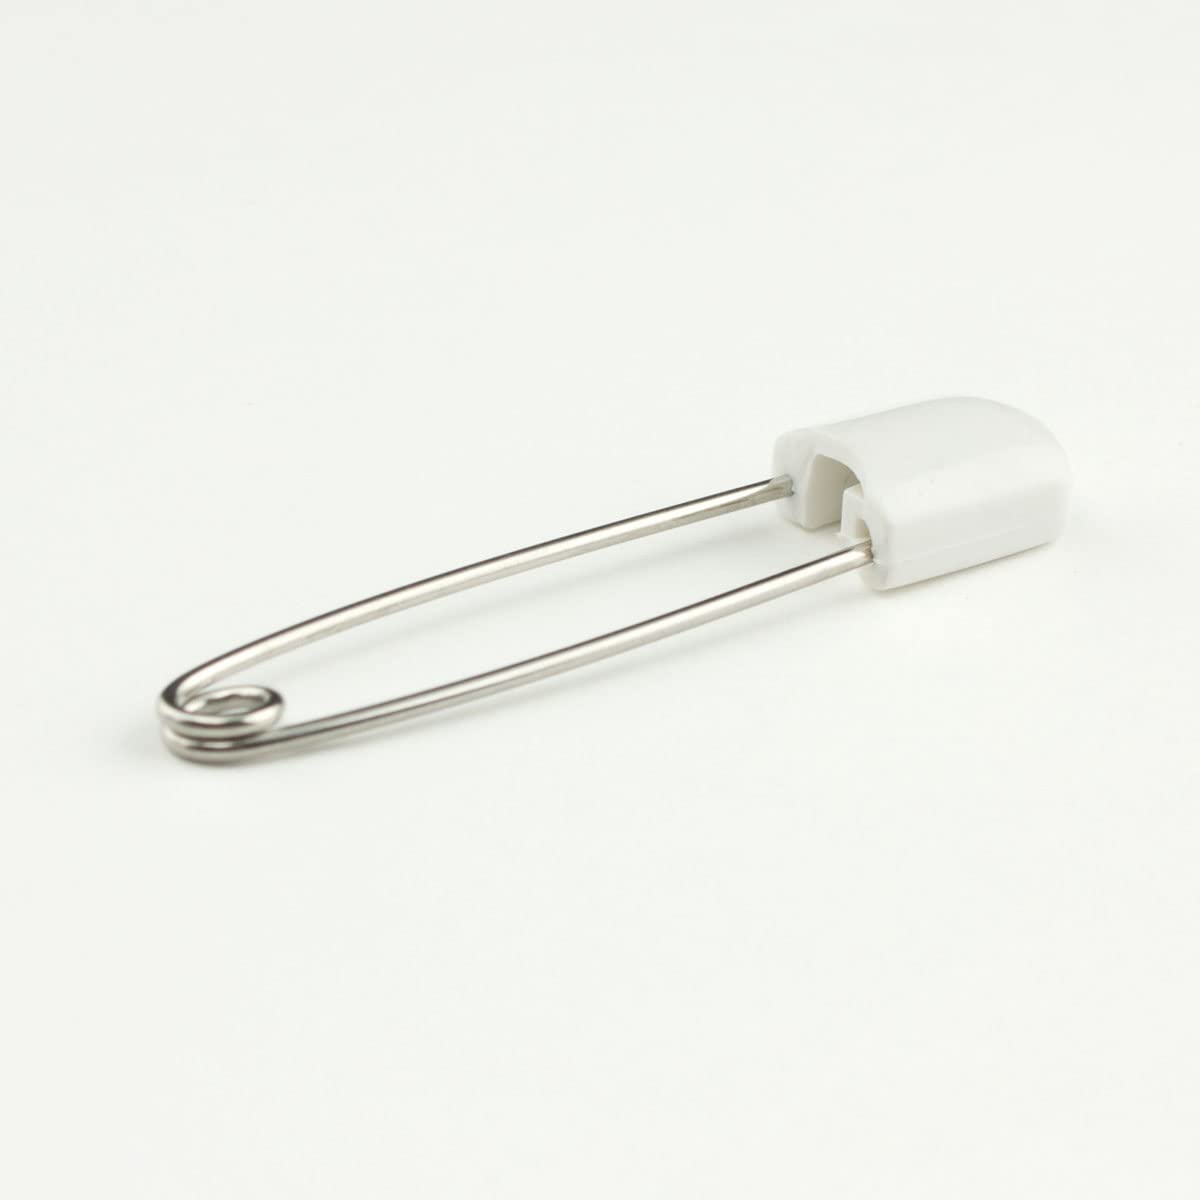 OsoCozy Diaper Pins - {White} - Sturdy, Stainless Steel Diaper